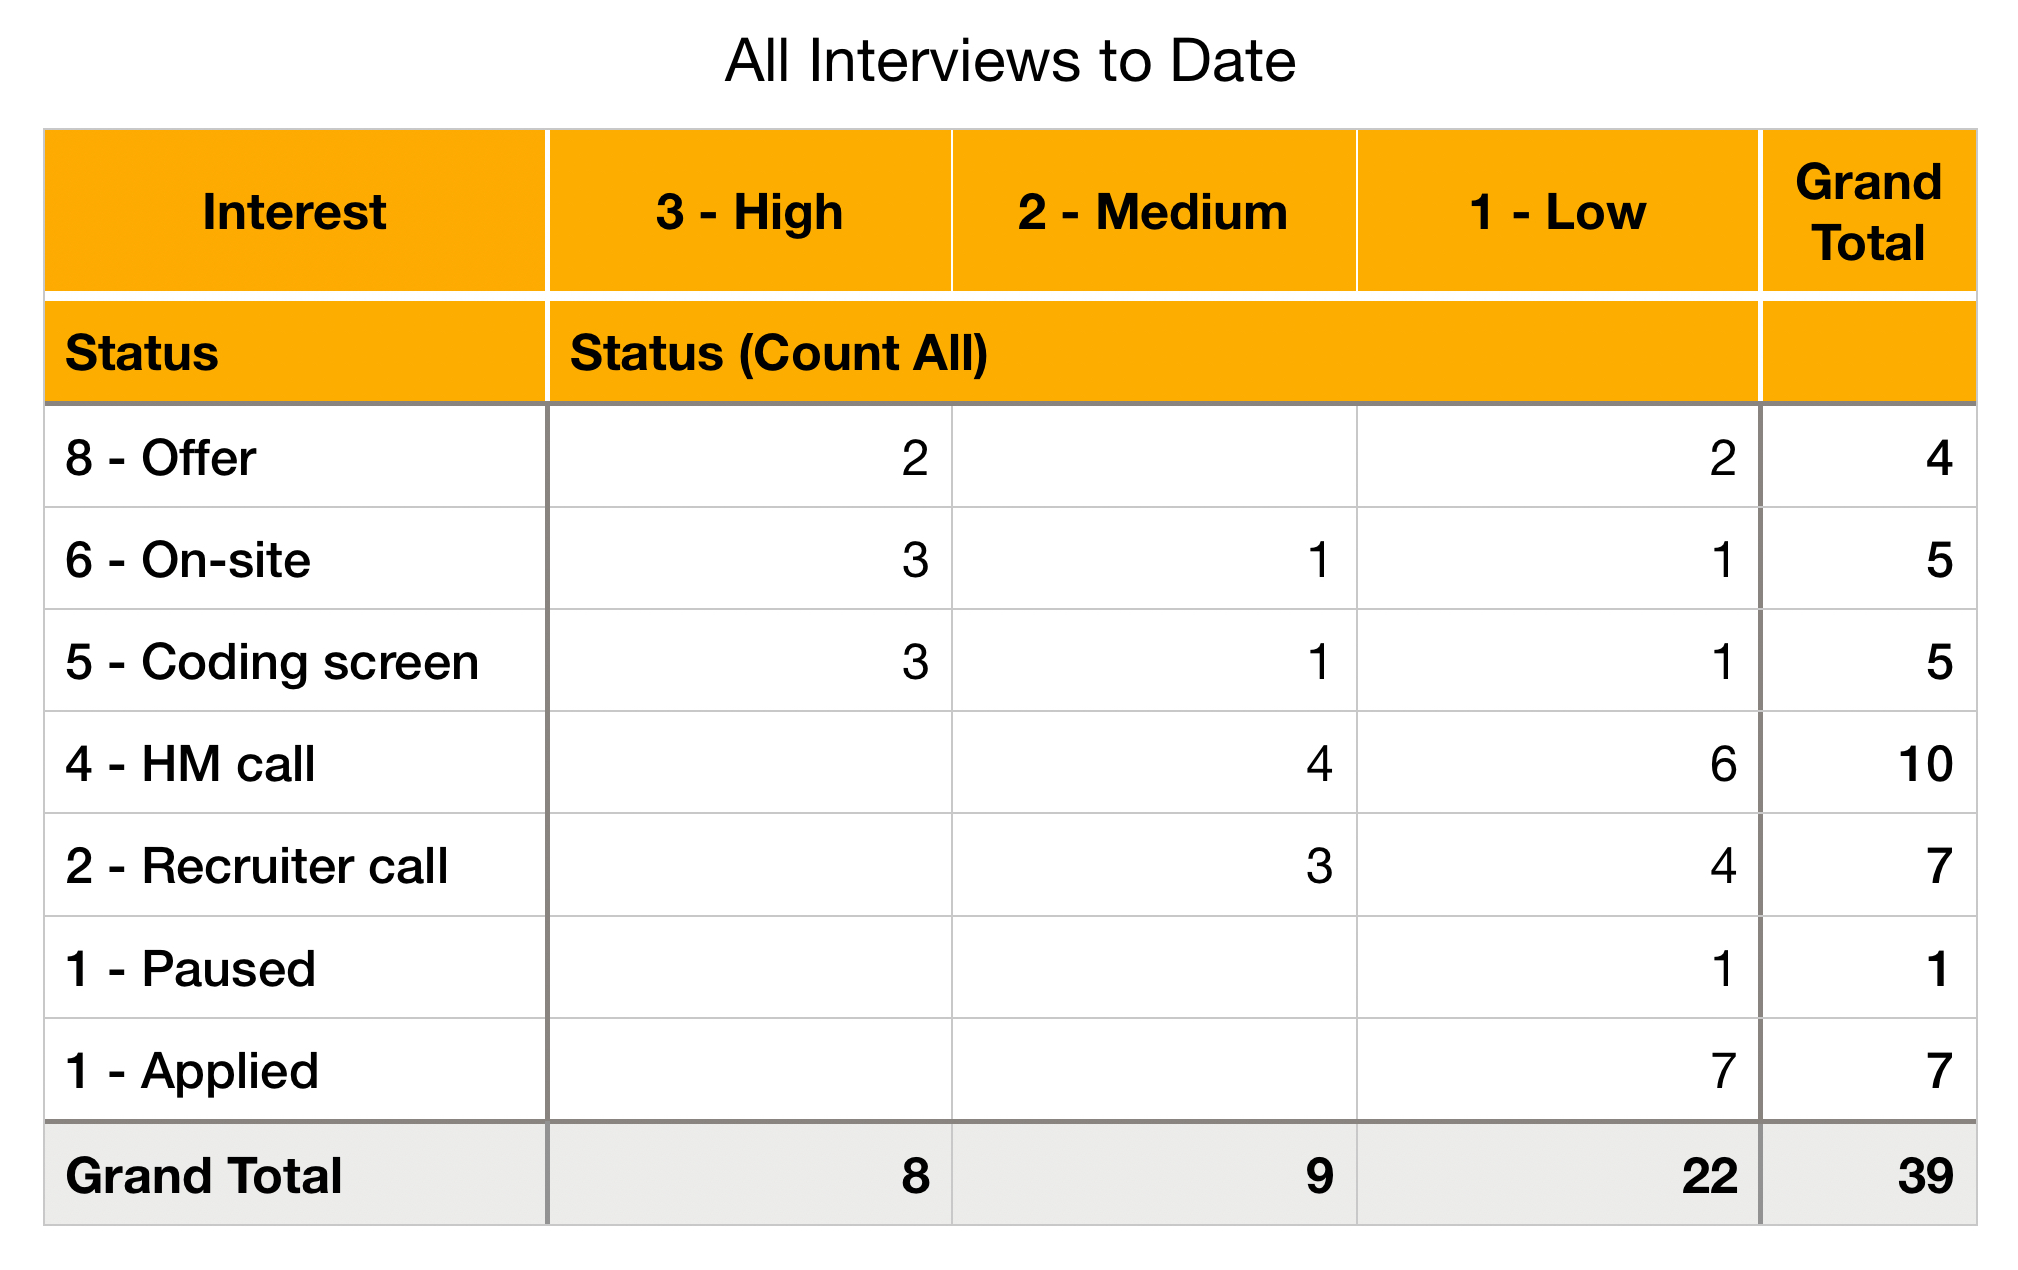 Interview summary after 39 conversations.